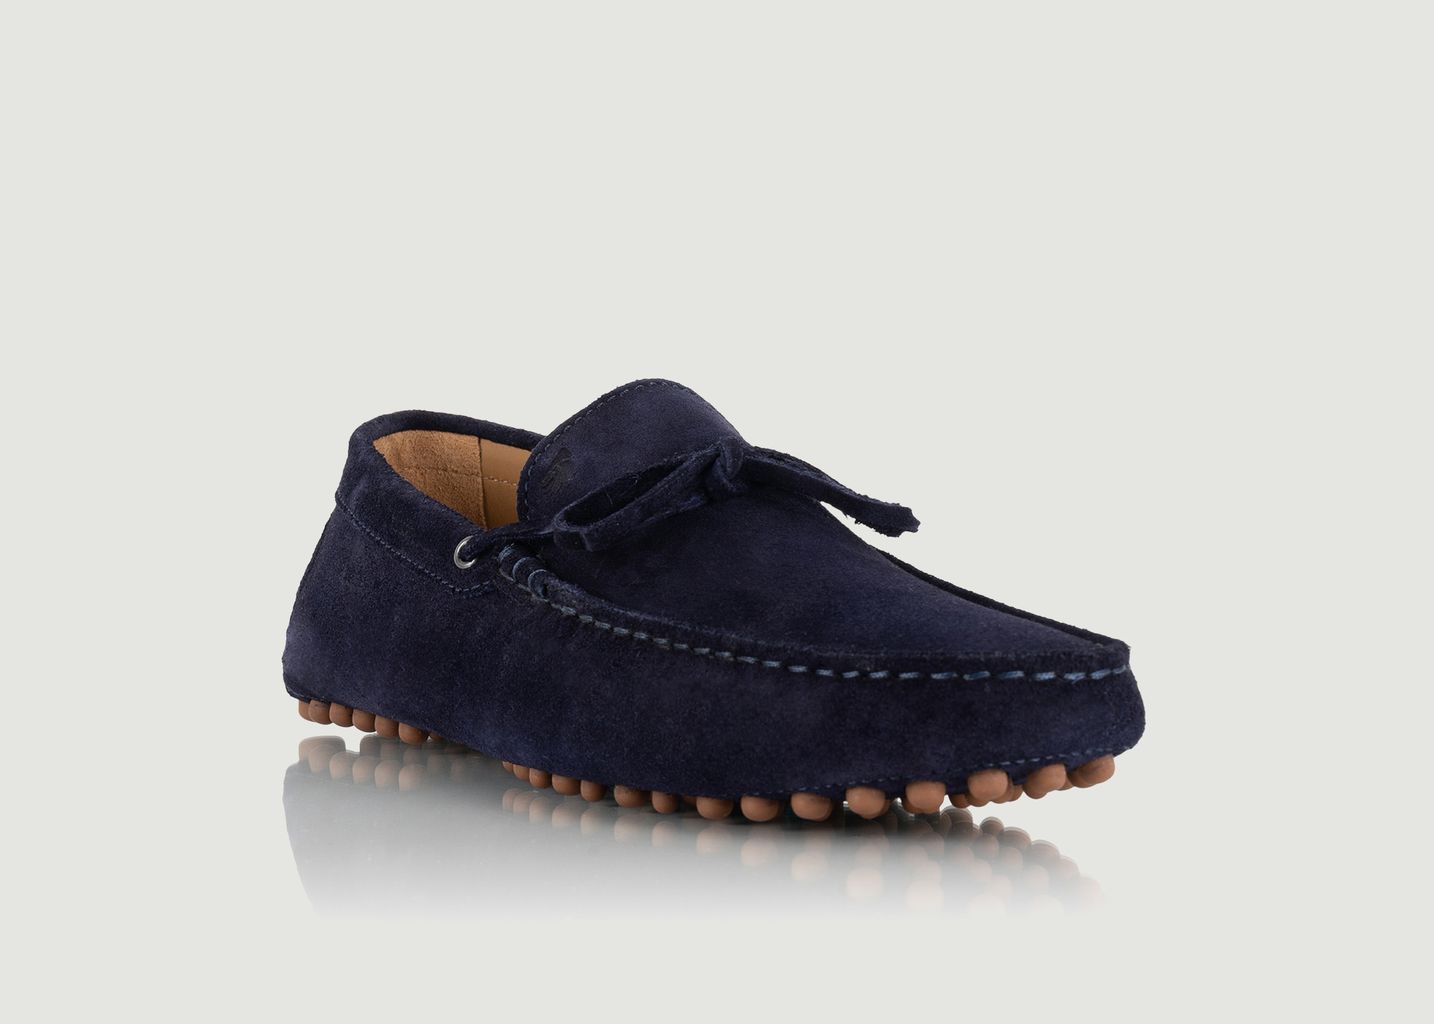 Ayrton suede leather studded loafers - Bobbies Paris